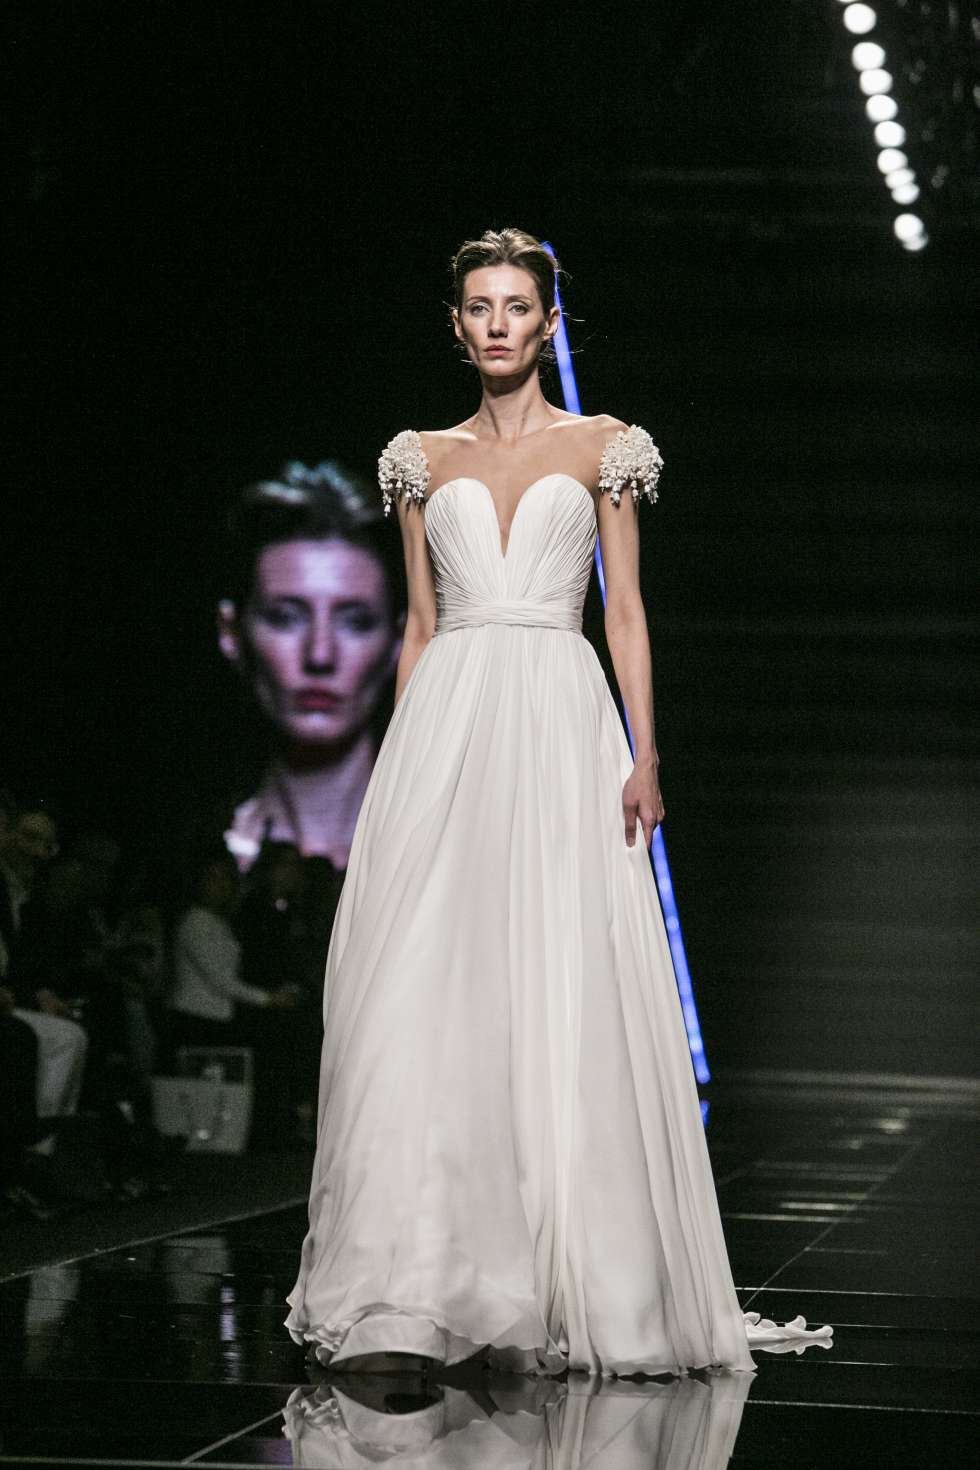 The 2019 Wedding Dress Collection by Enzo Miccio